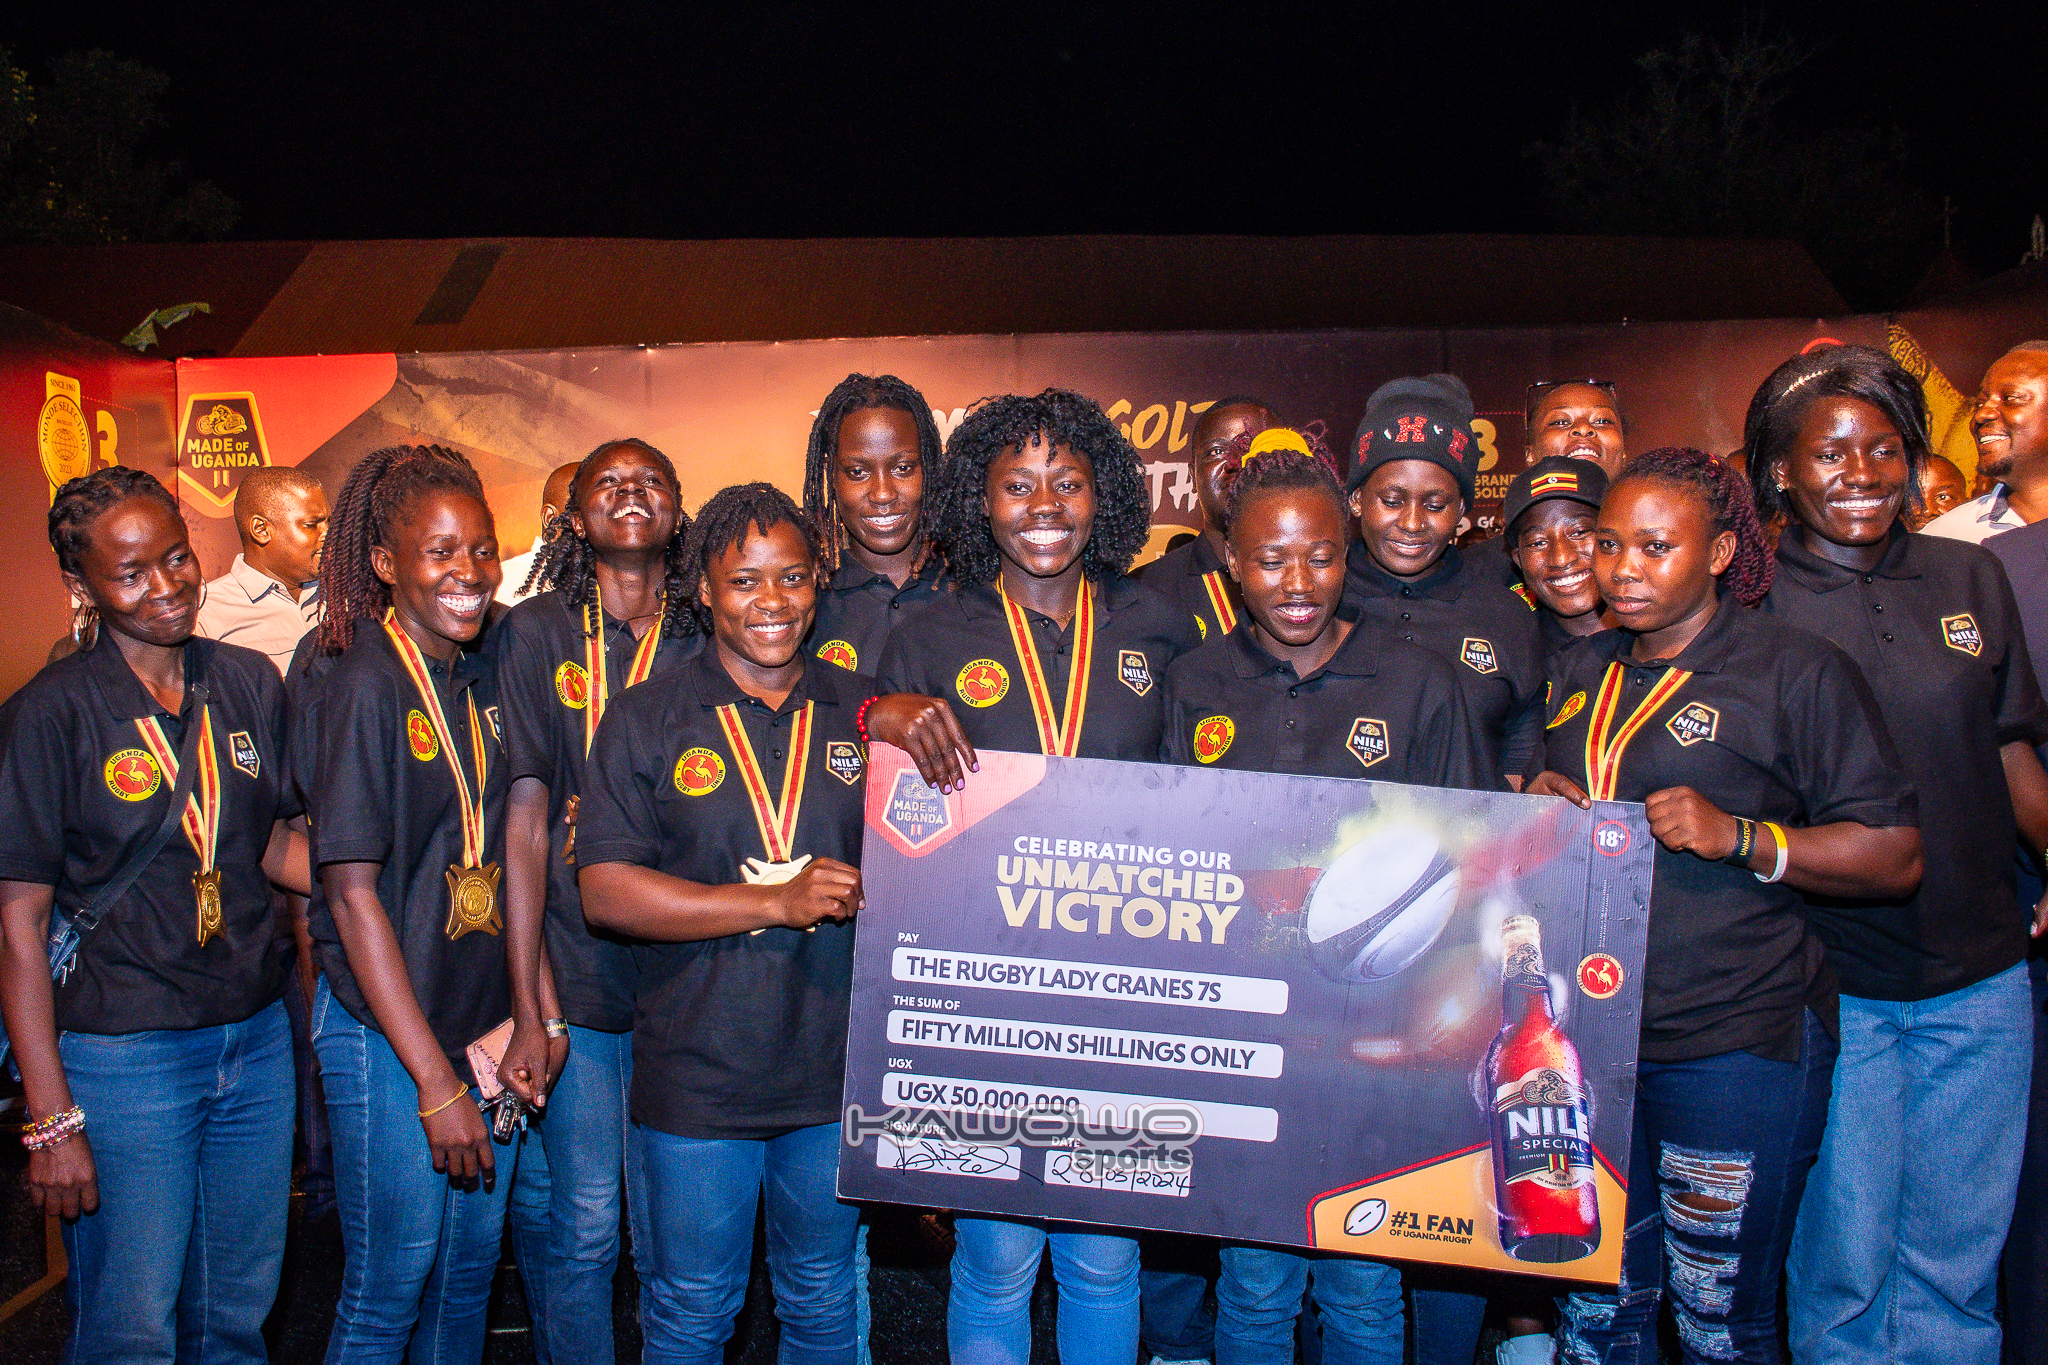 Nile Special rewards African Games Rugby 7s gold medallists with UGX 100 million